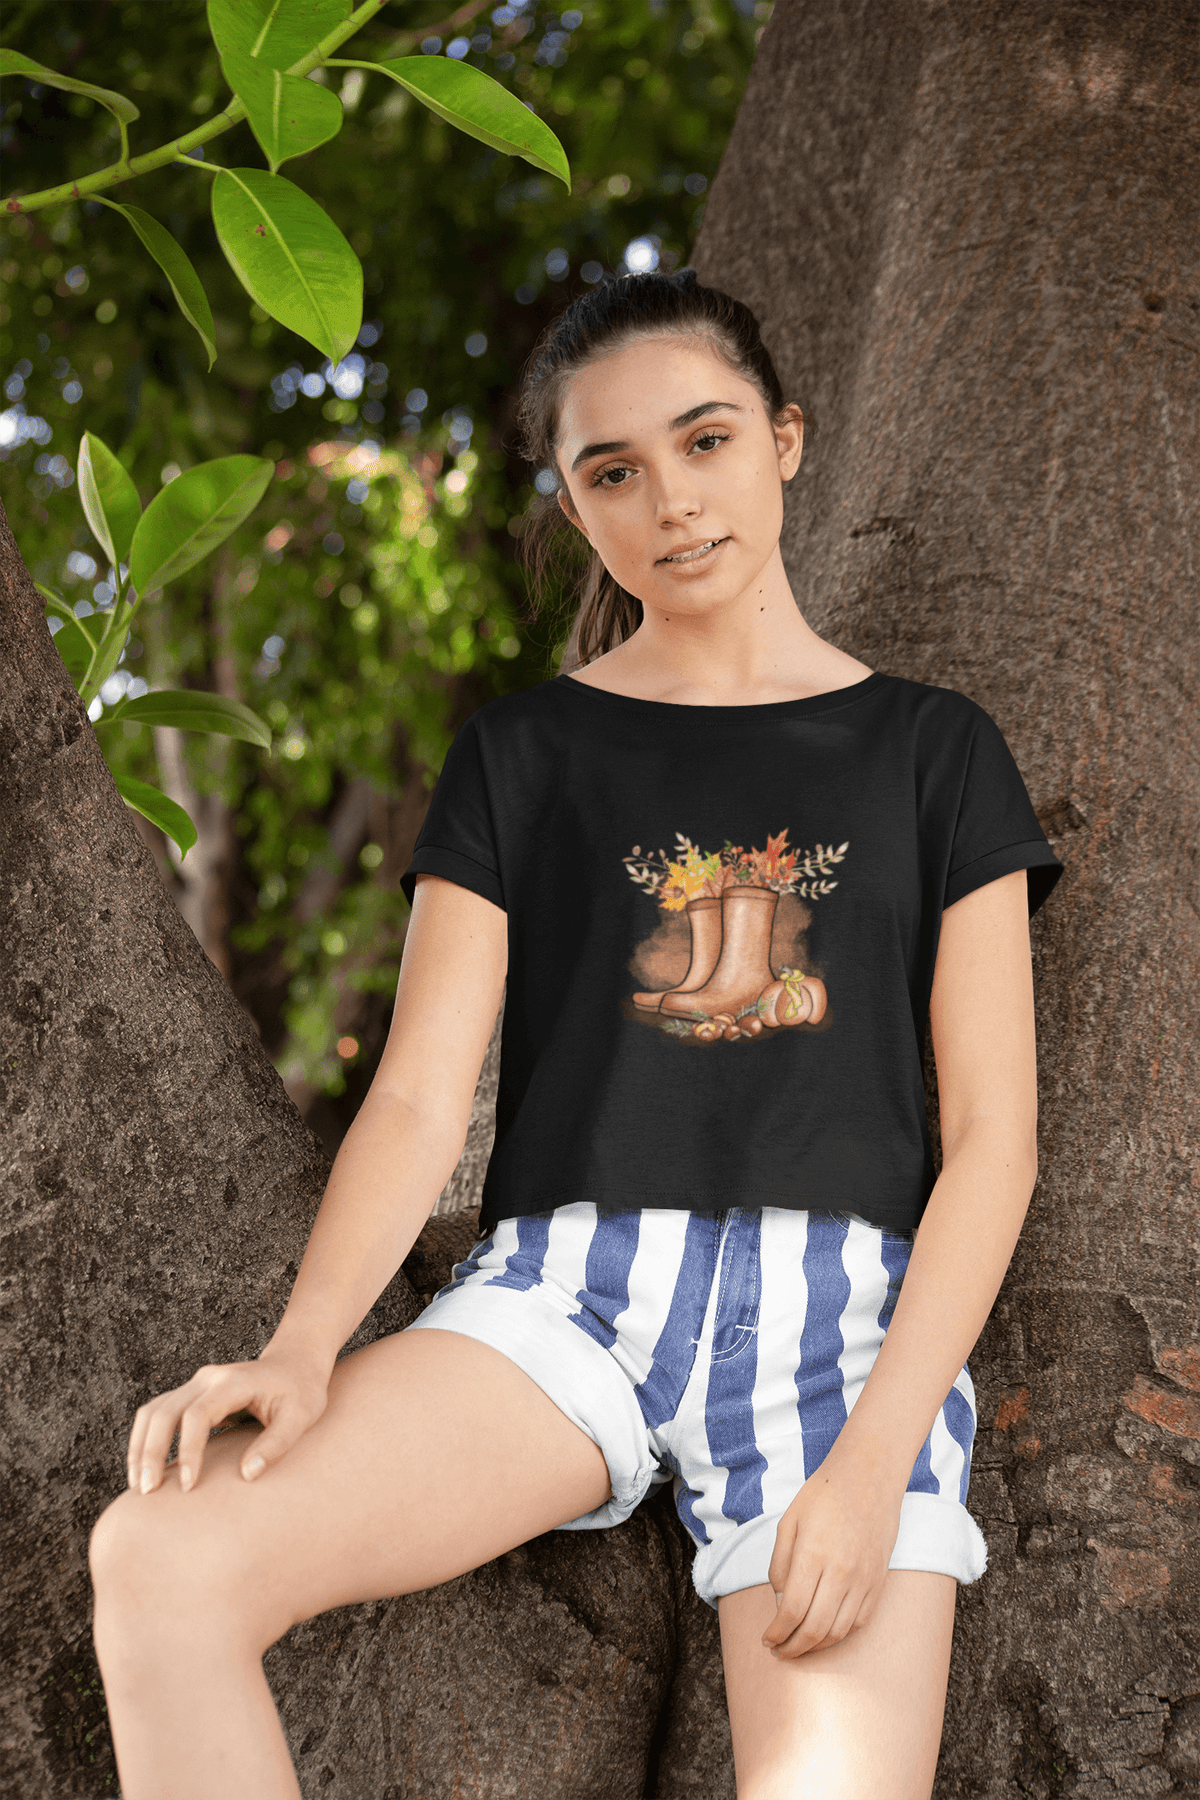 Just a GIRL who Loves FALL Cropped T-Shirt-Cropped Tees-StylinArts